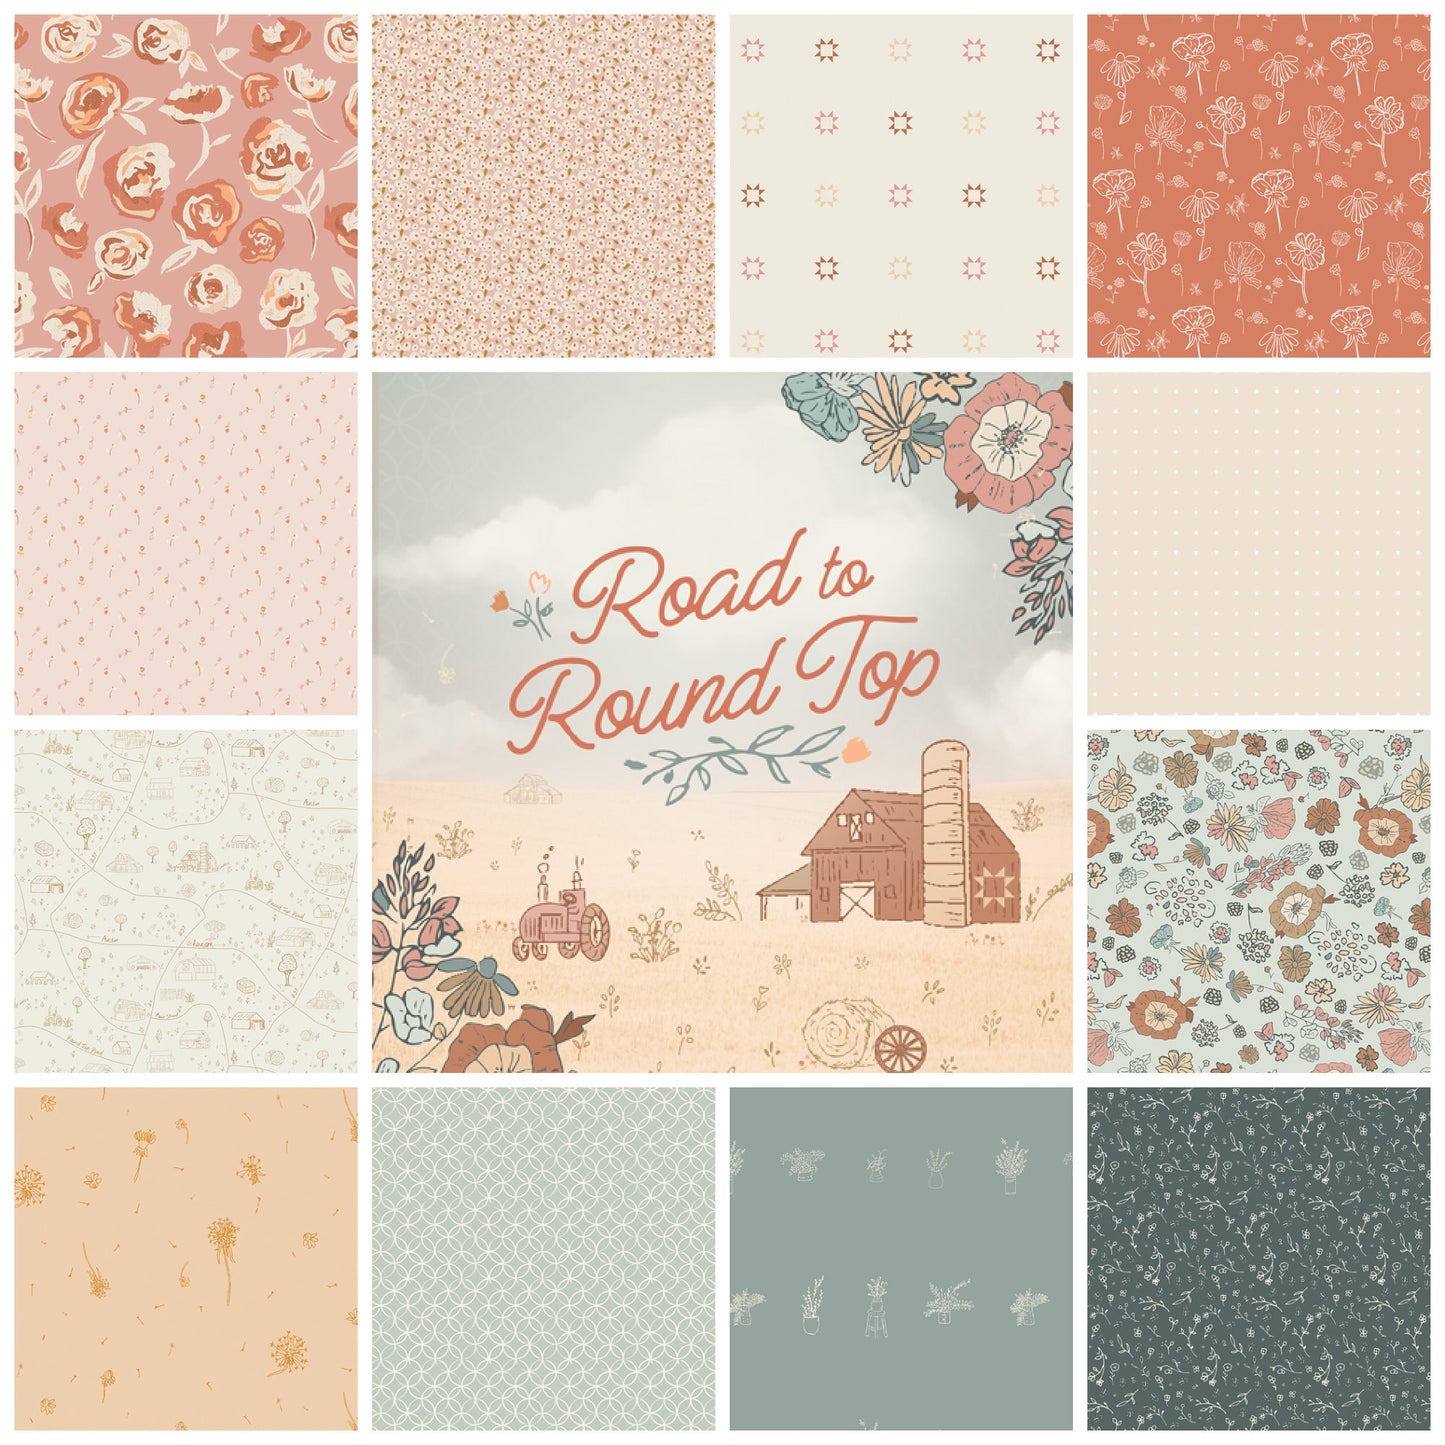 Road to Round Top - Roadside Fields Print - by Elizabeth Chappell for Art Gallery Fabrics